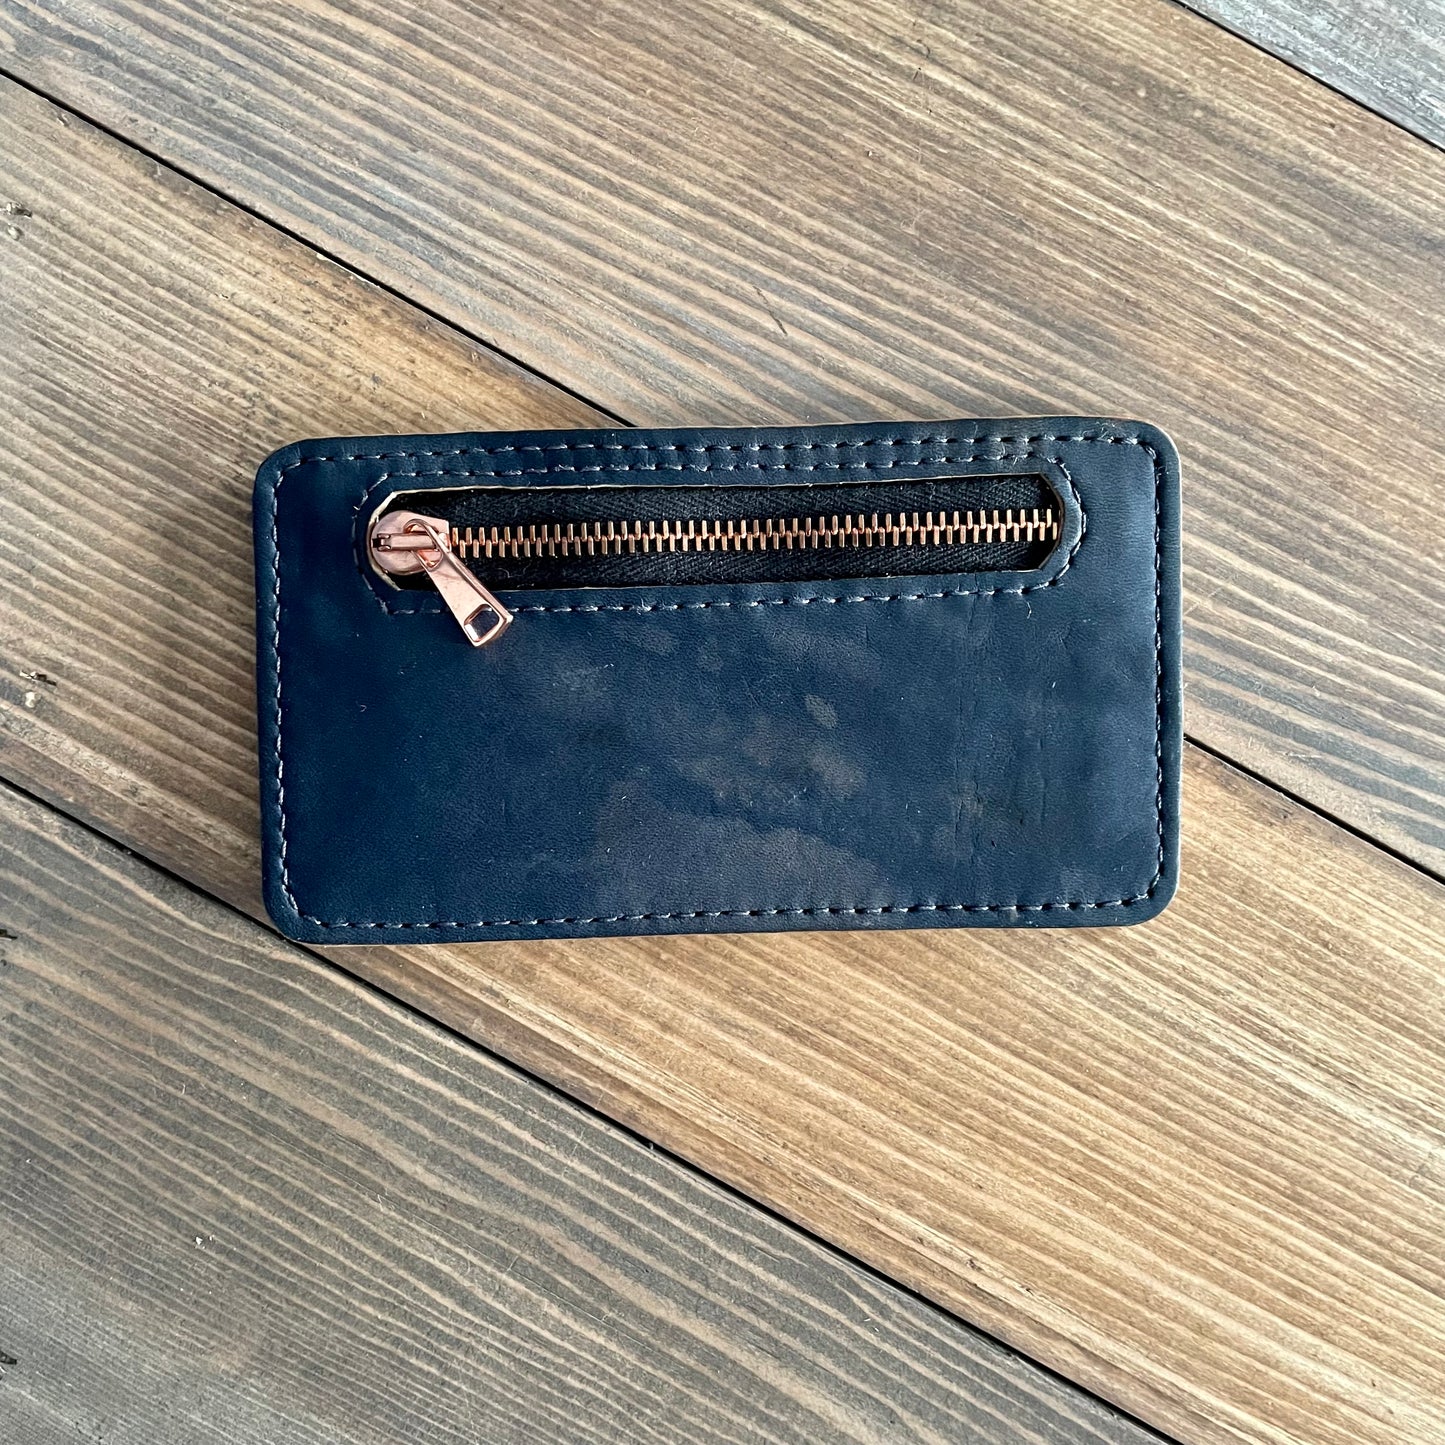 Card holder with Zipper